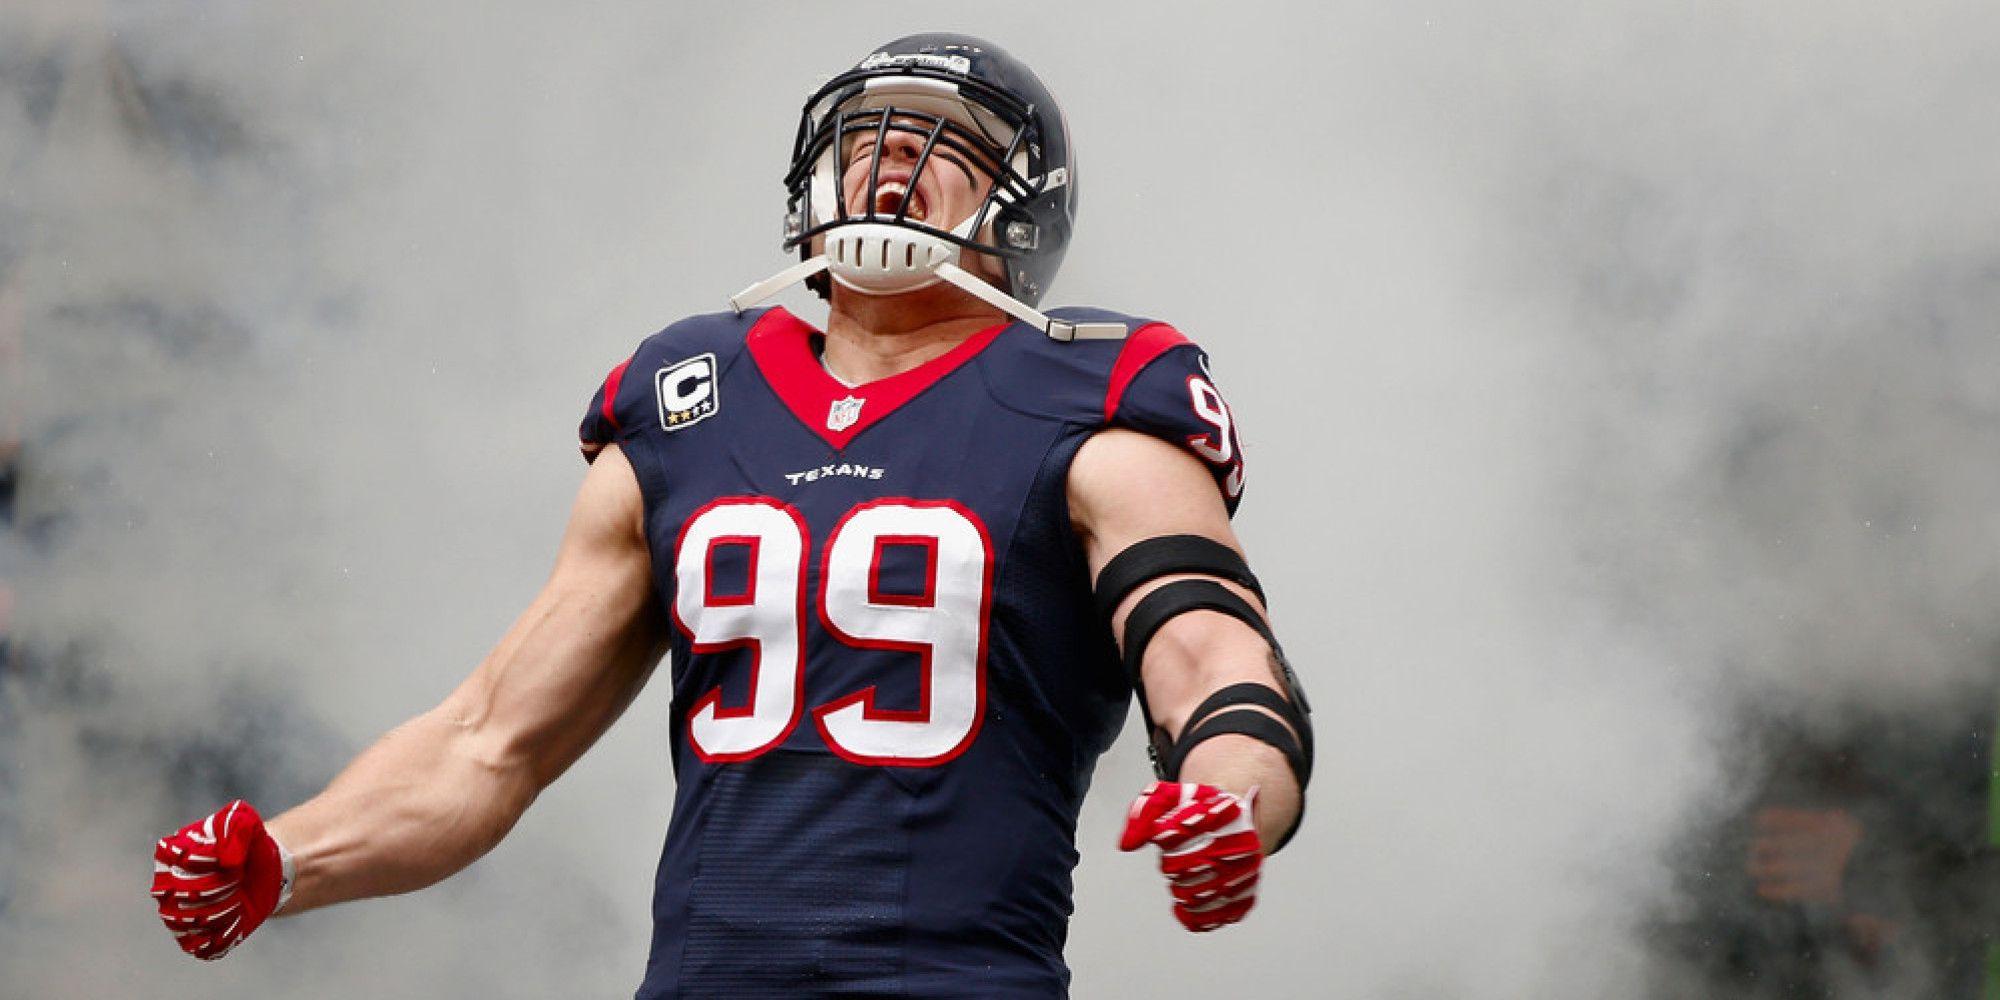 The Texans Defensive Lineman of All Time